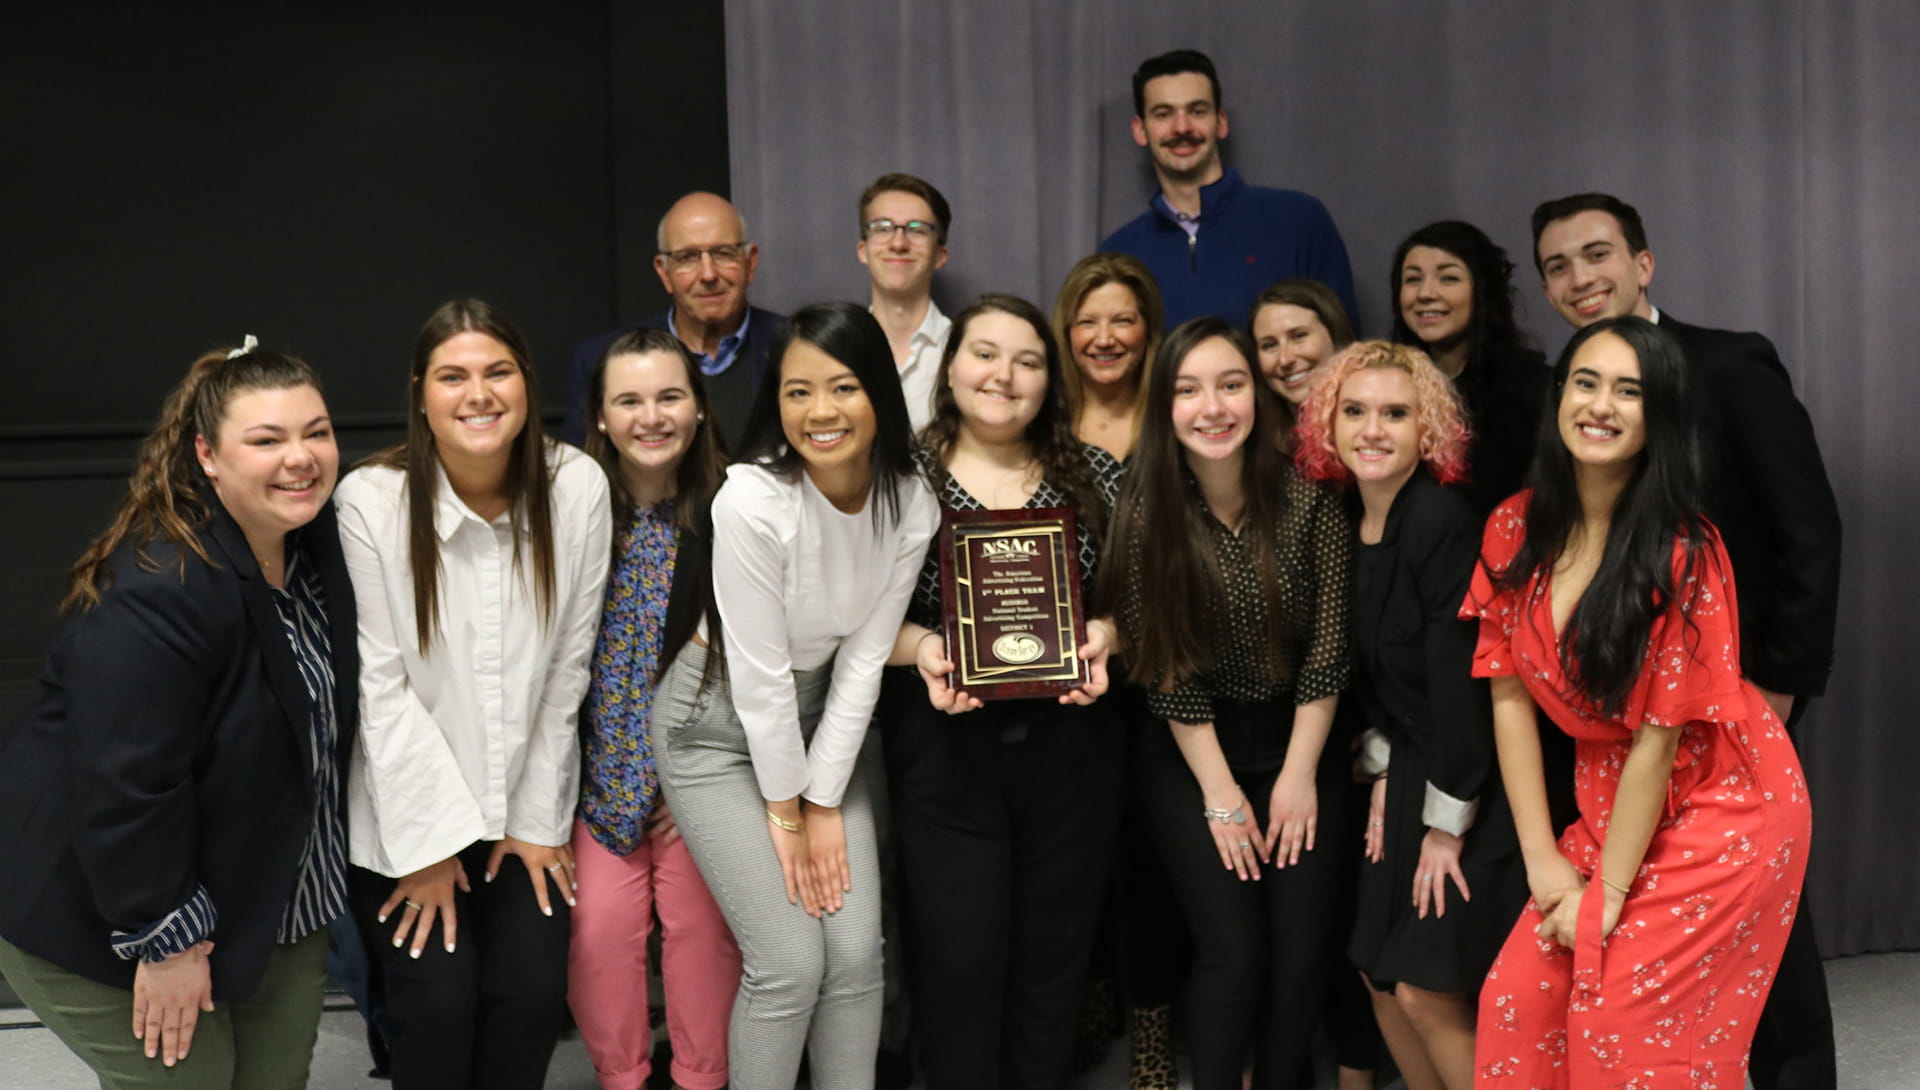 JWU's ADTEAM after winning the NSAC District championship in 2018.